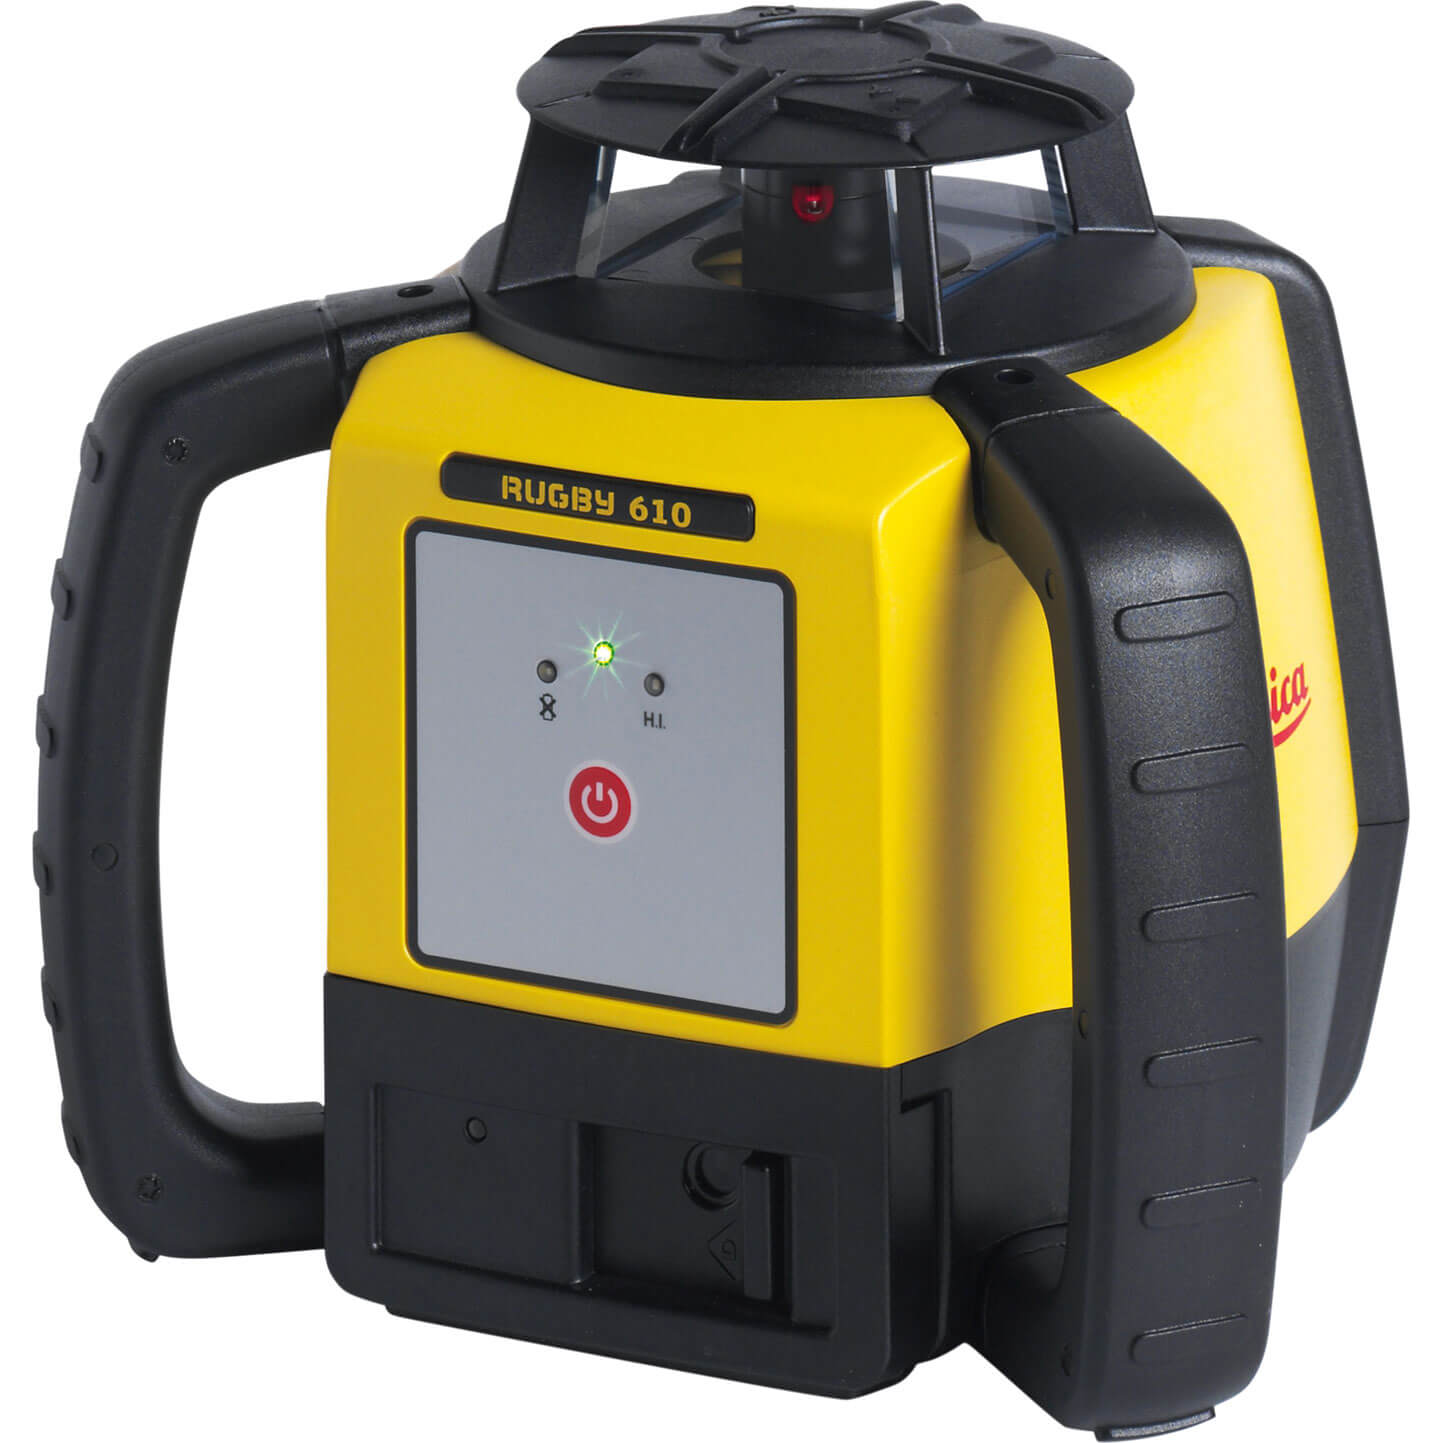 Photo of Leica Geosystems Rugby 610bl Rotating Self Levelling Laser Level